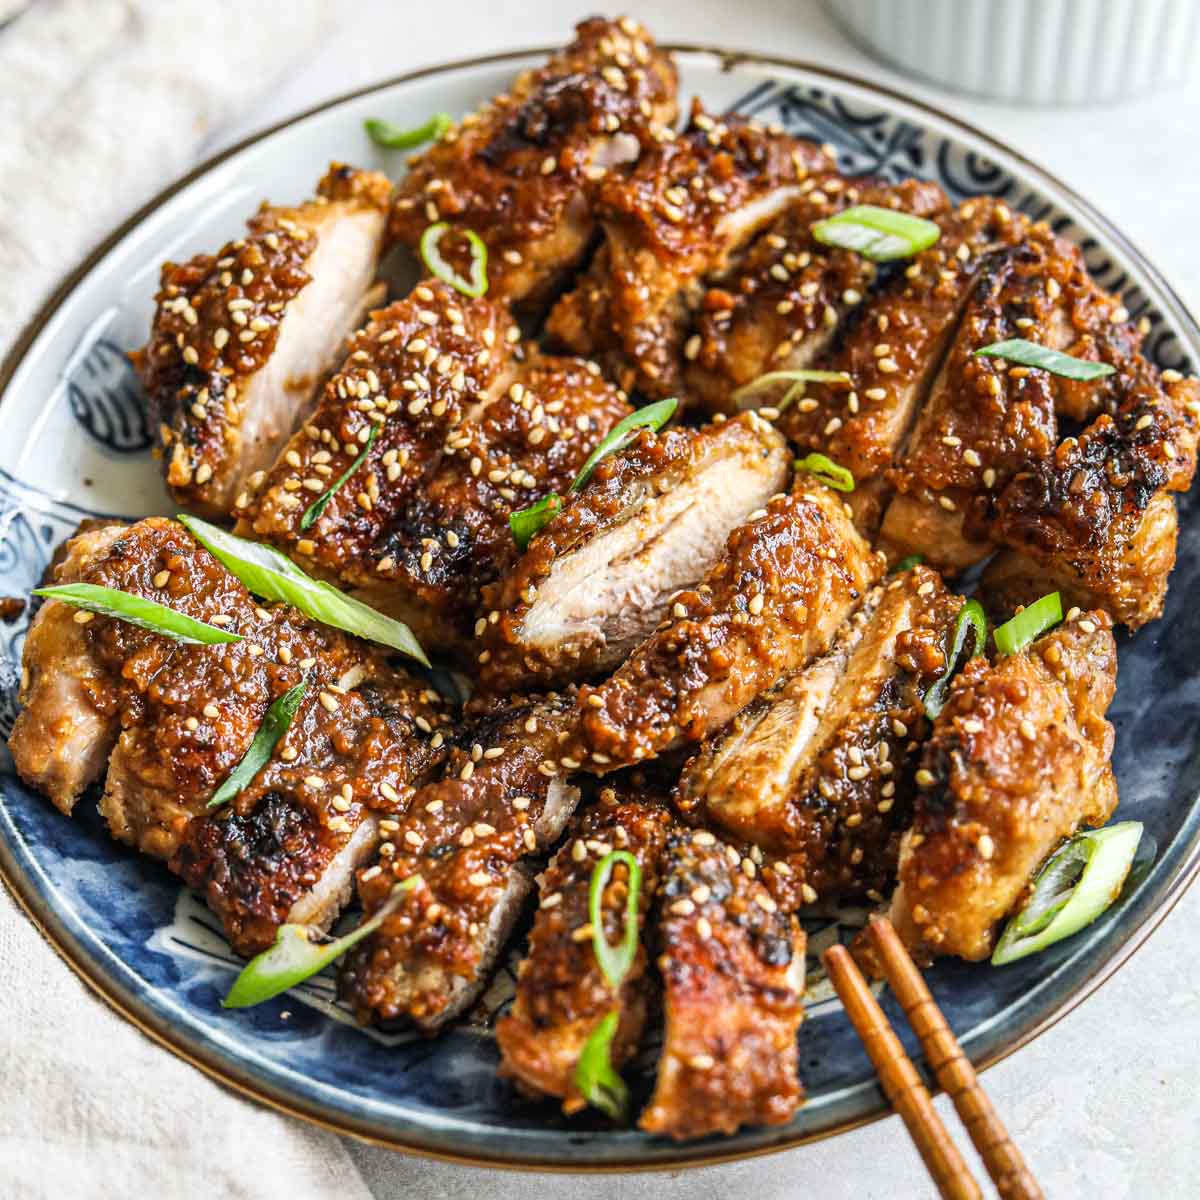 Miso jidori chicken thighs topped with sesame seeds and sliced green onions on a blue ceramic Japanese plate.